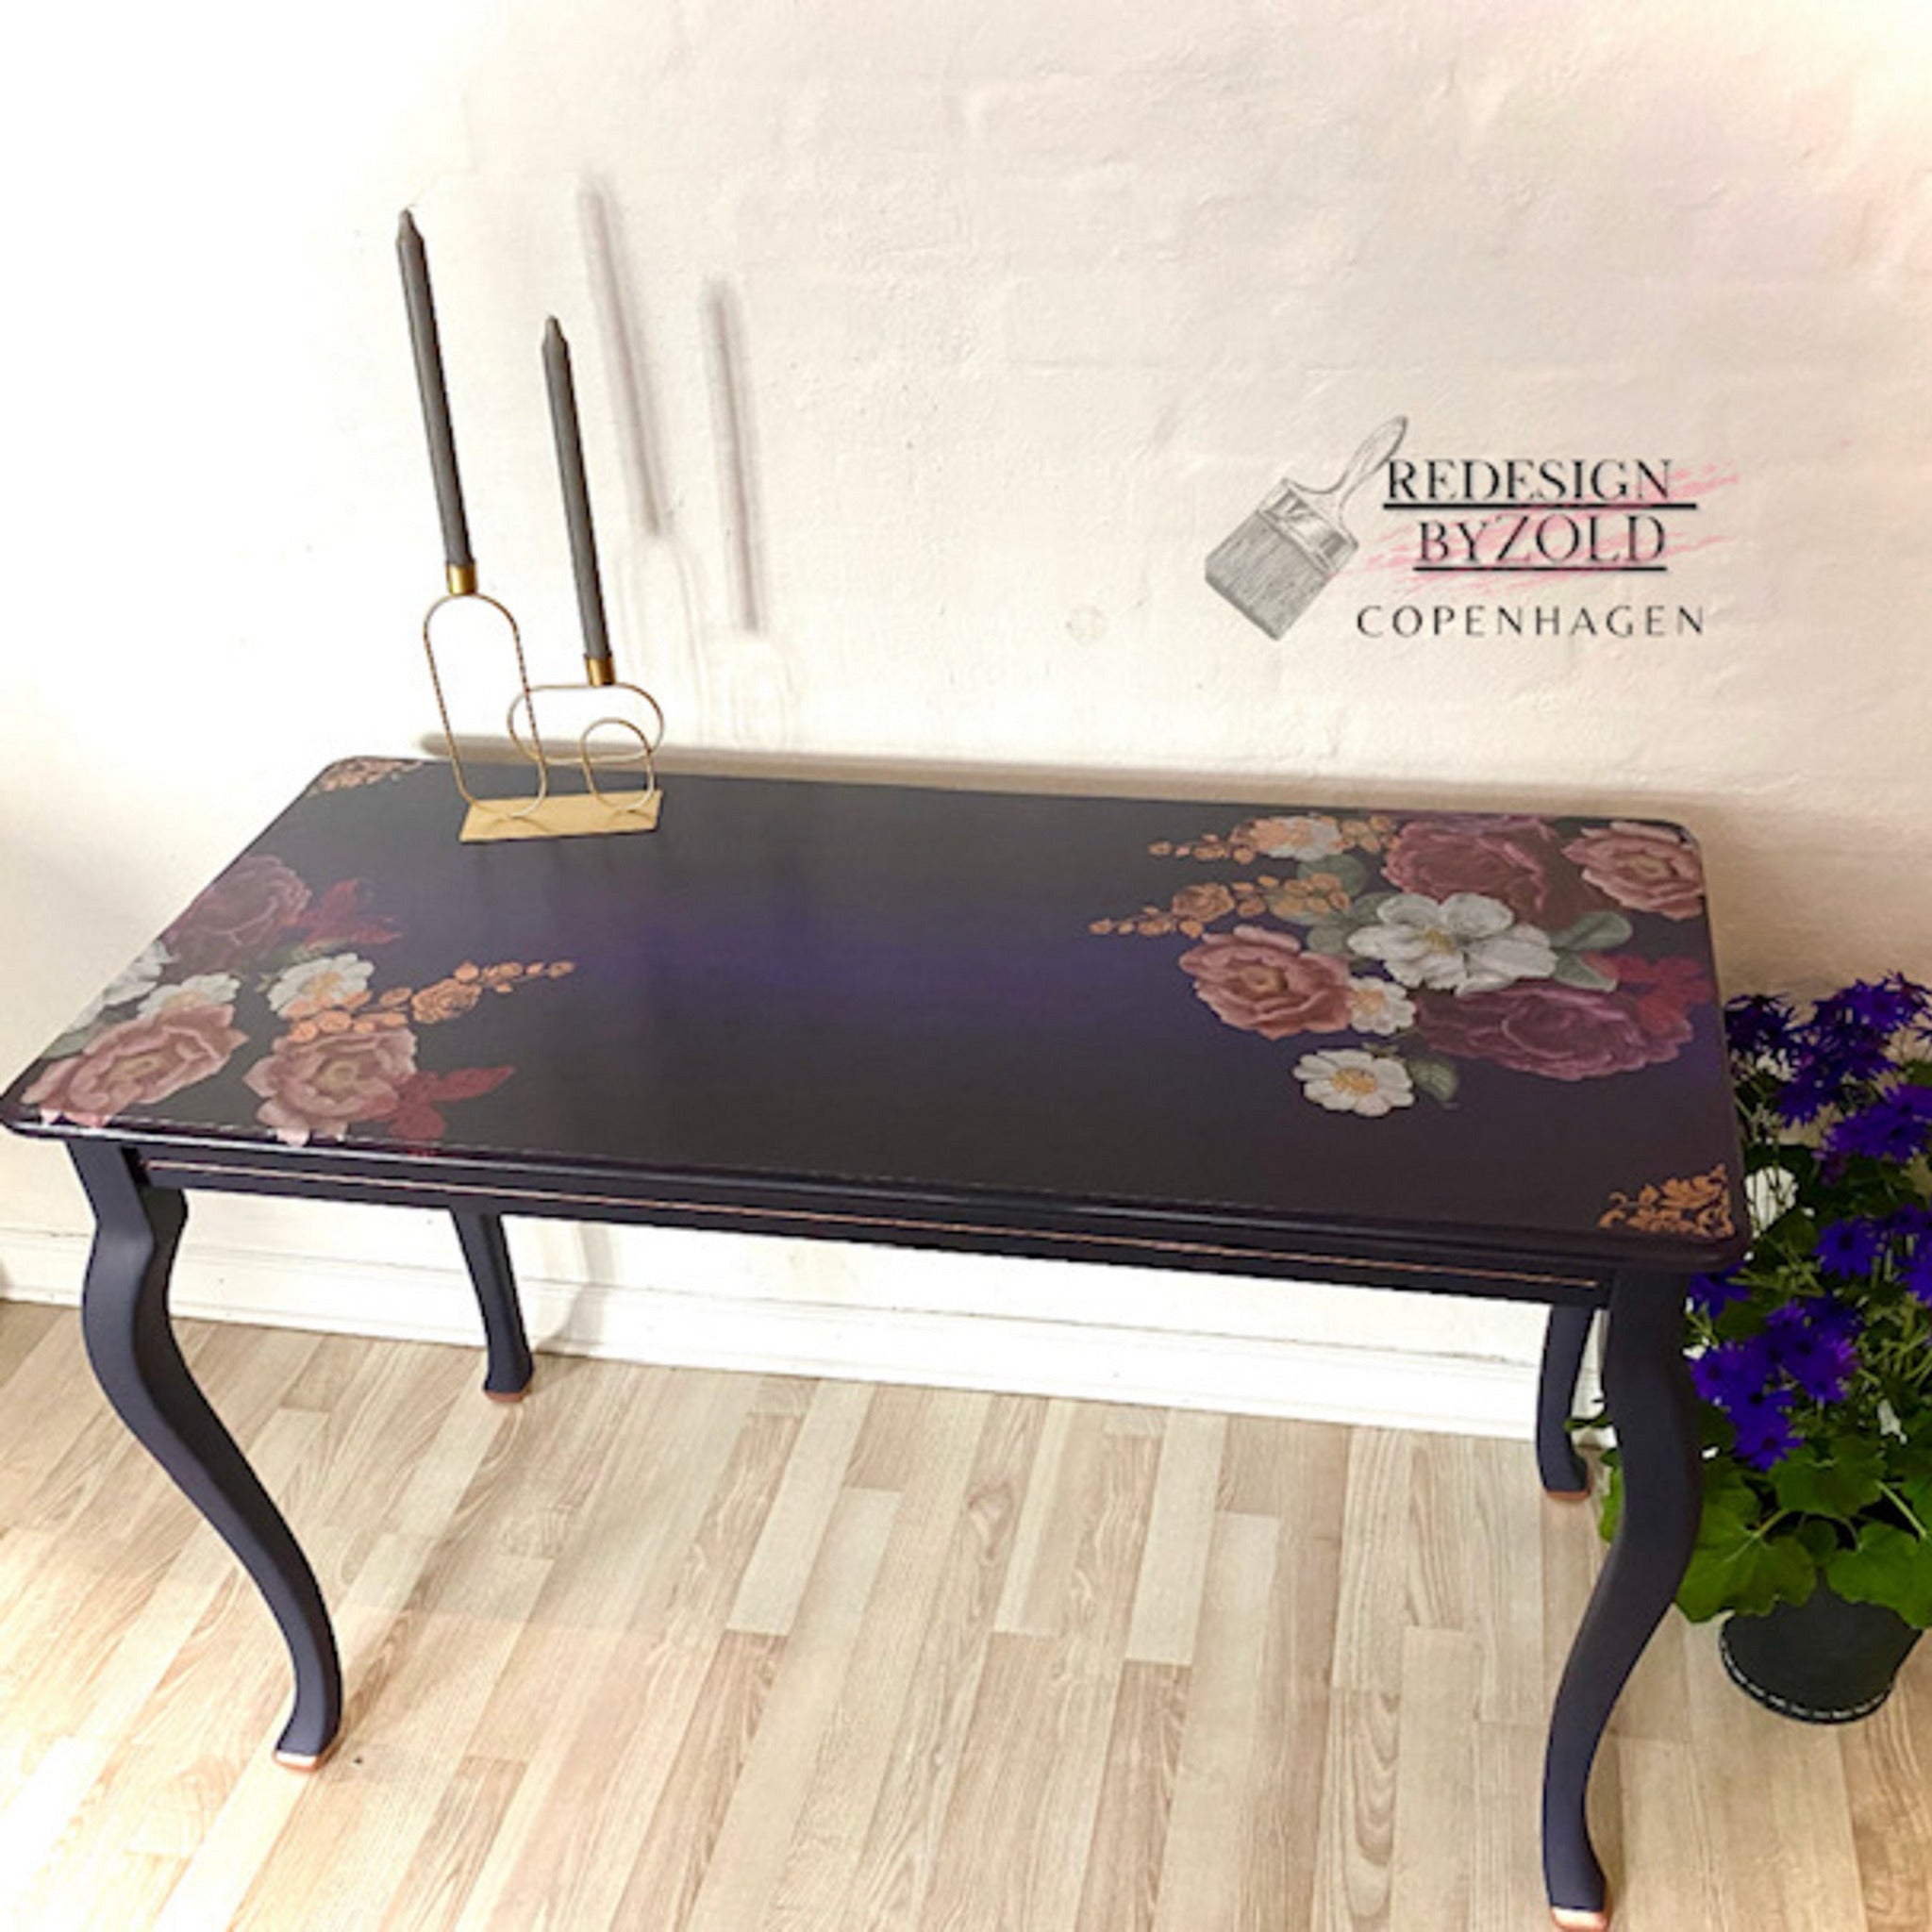 A vintage table refurbished by Redesign by Zold Copenhagen is painted midnight blue and features the Floral Romance transfer on the top.